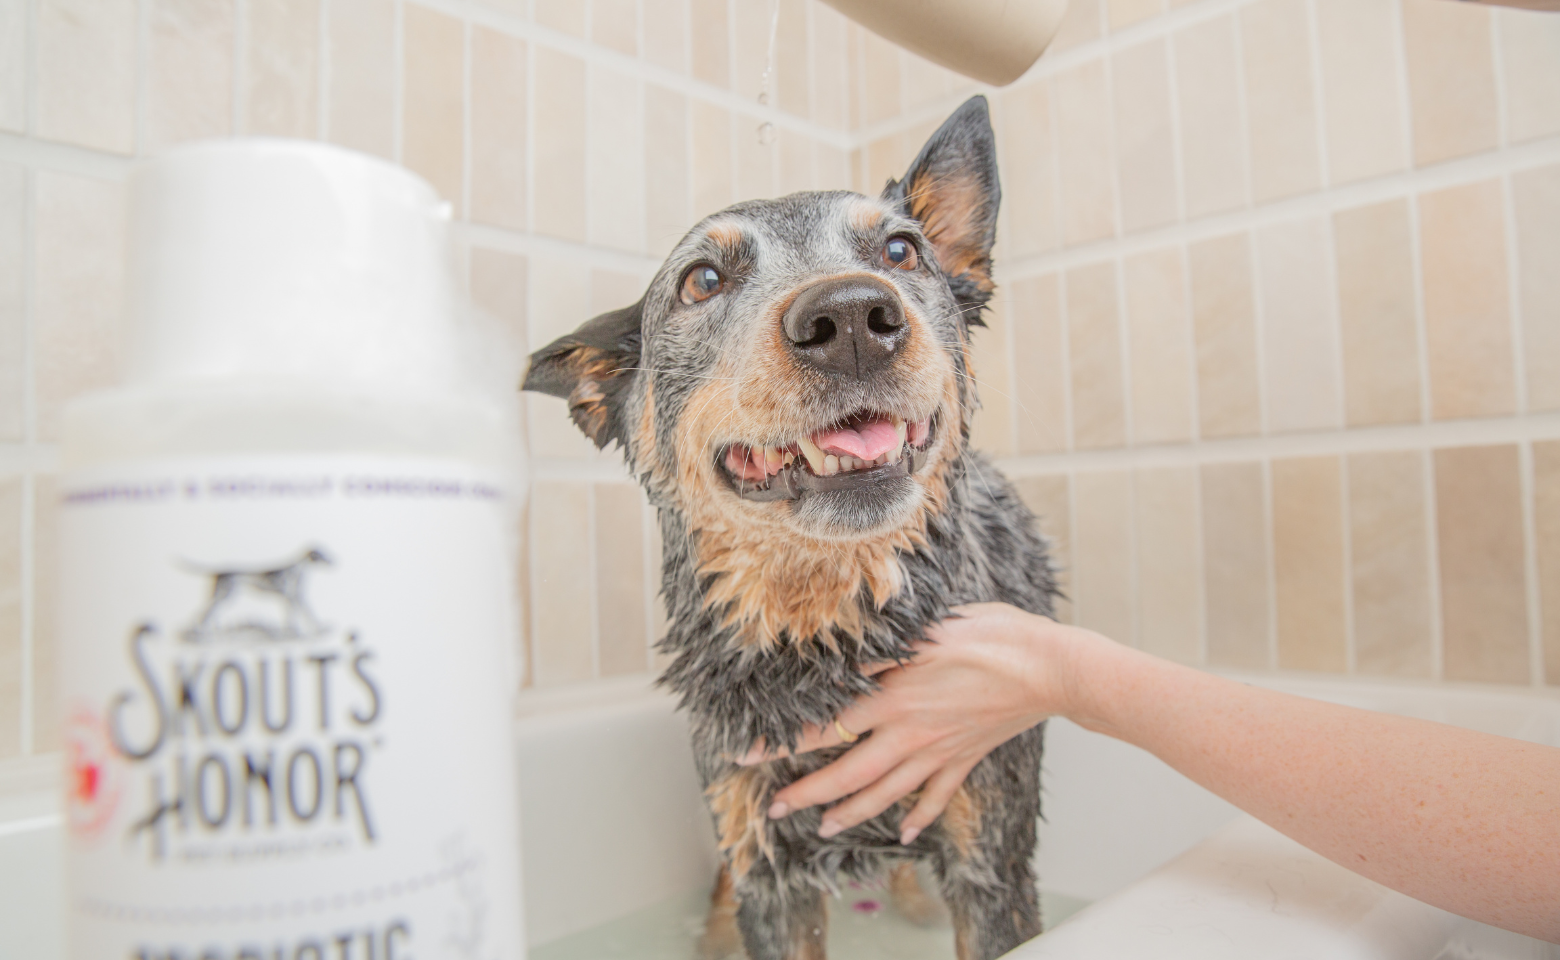 Regular dog grooming reduces spring allergens in the home